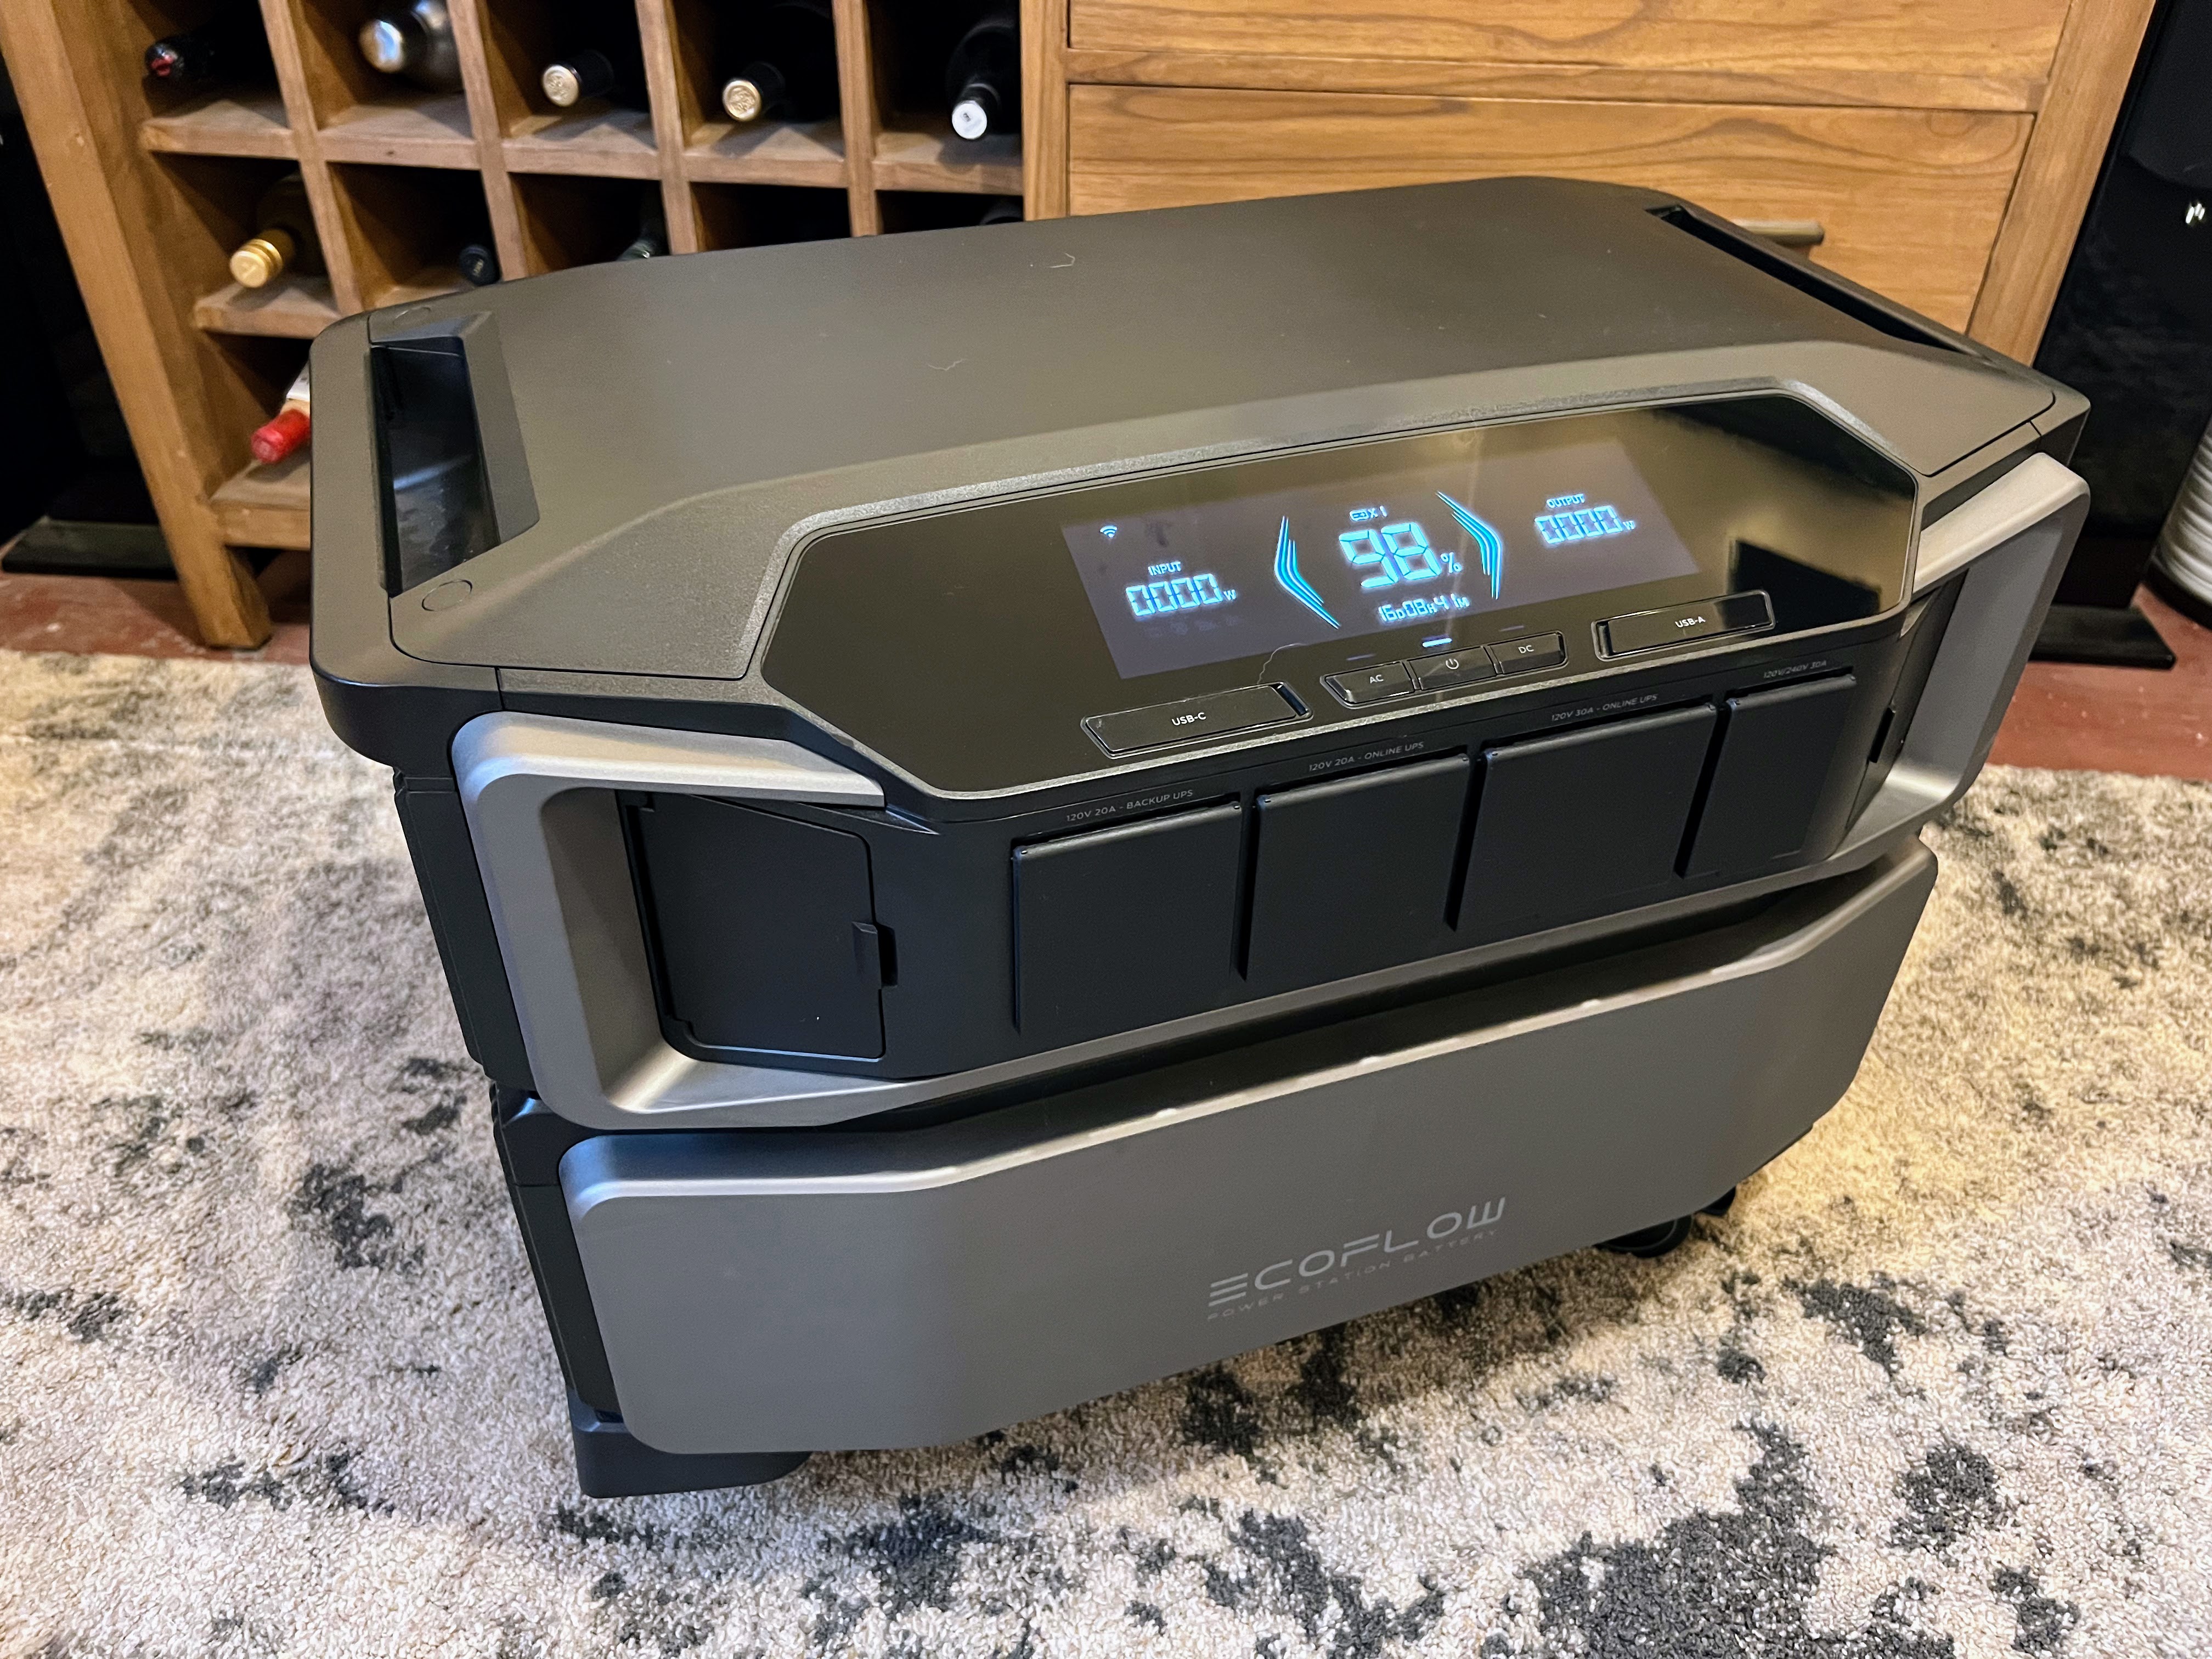 The EcoFlow Delta Pro Ultra looks like a high-tech pirate chest on wheels.